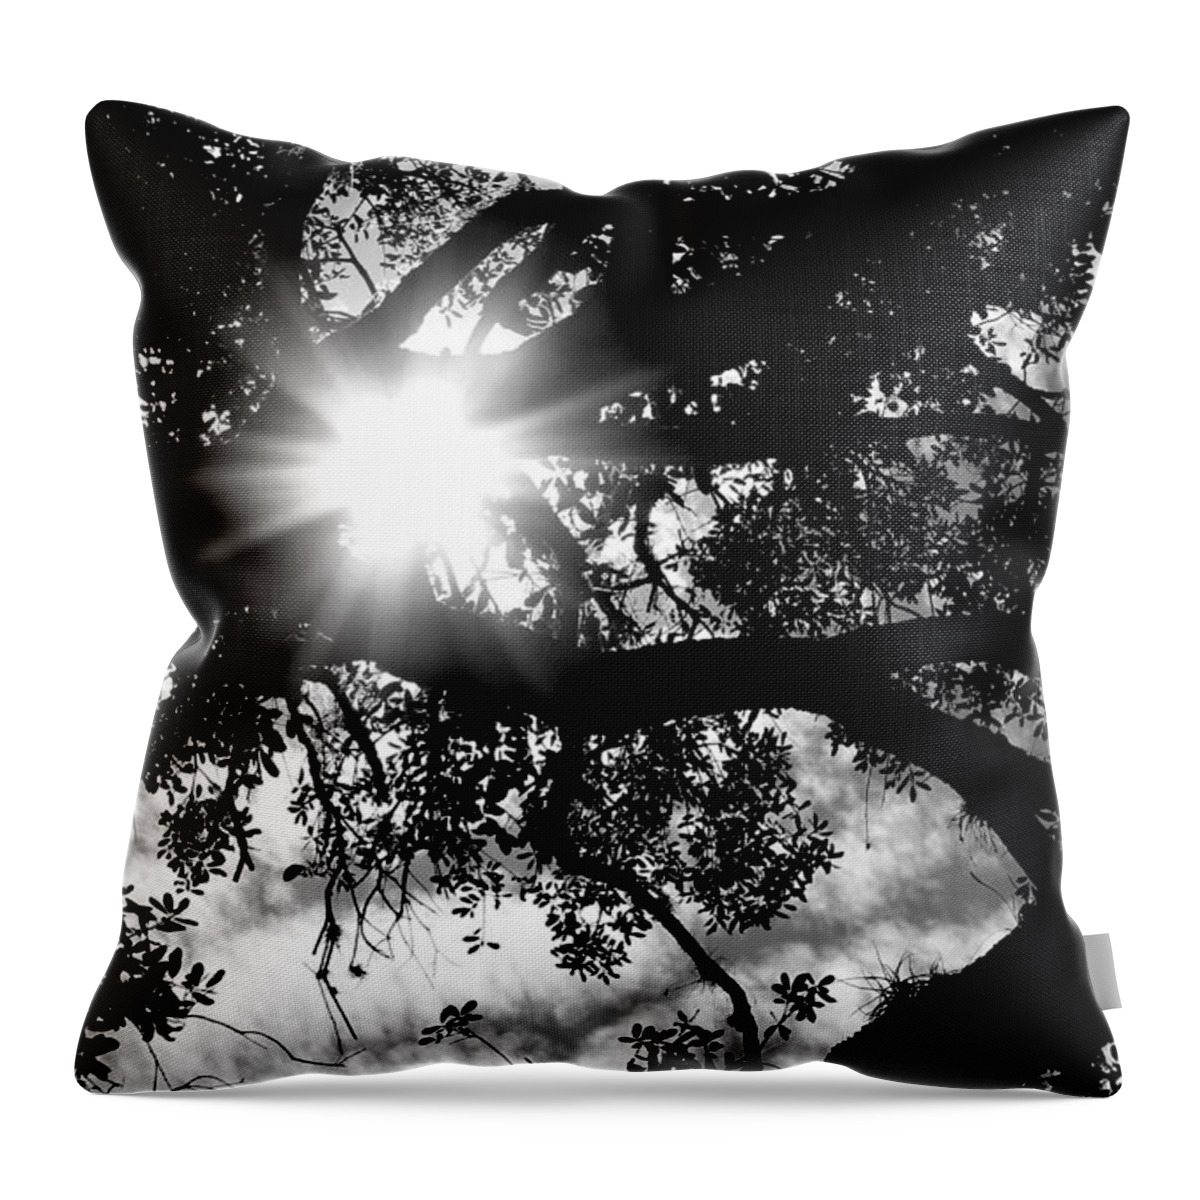 Photo For Sale Throw Pillow featuring the photograph Bright Light by Robert Wilder Jr